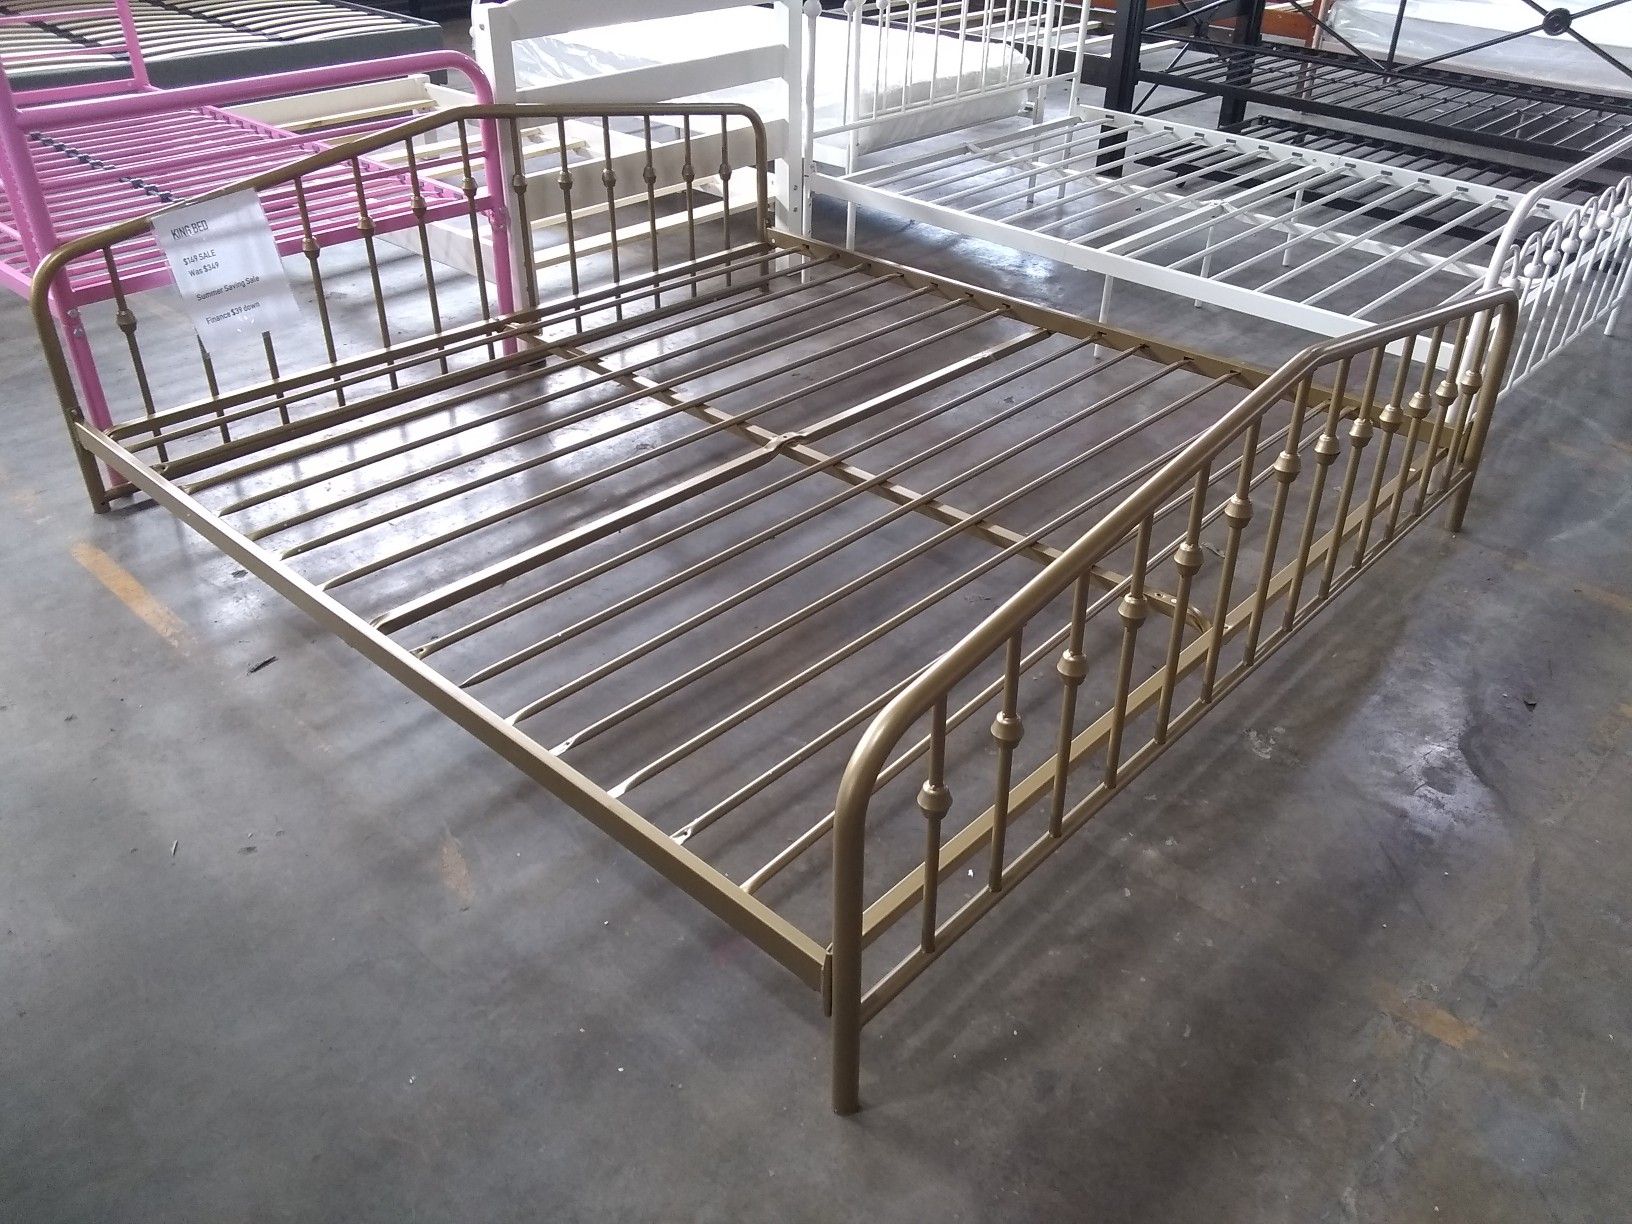 King bed frame $75 sale Tuesday 😎 2759 Irving Blvd Dallas 75207😎